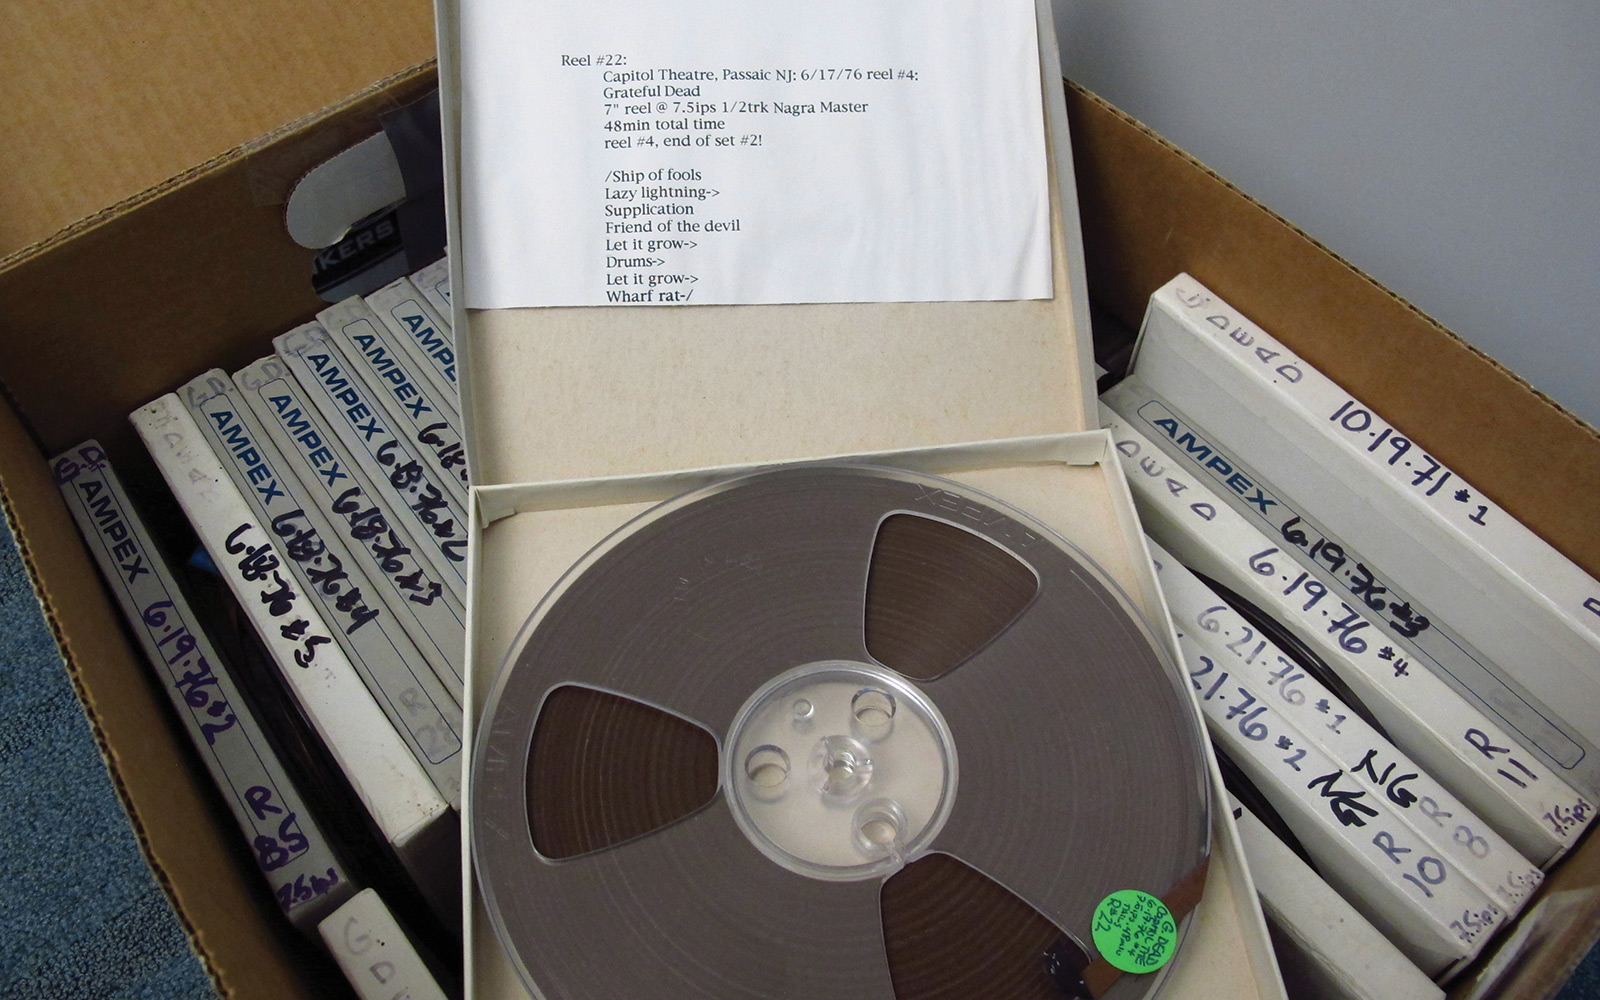 All told, ABCD recovered some 375 reels of the Grateful Deads live recordings.